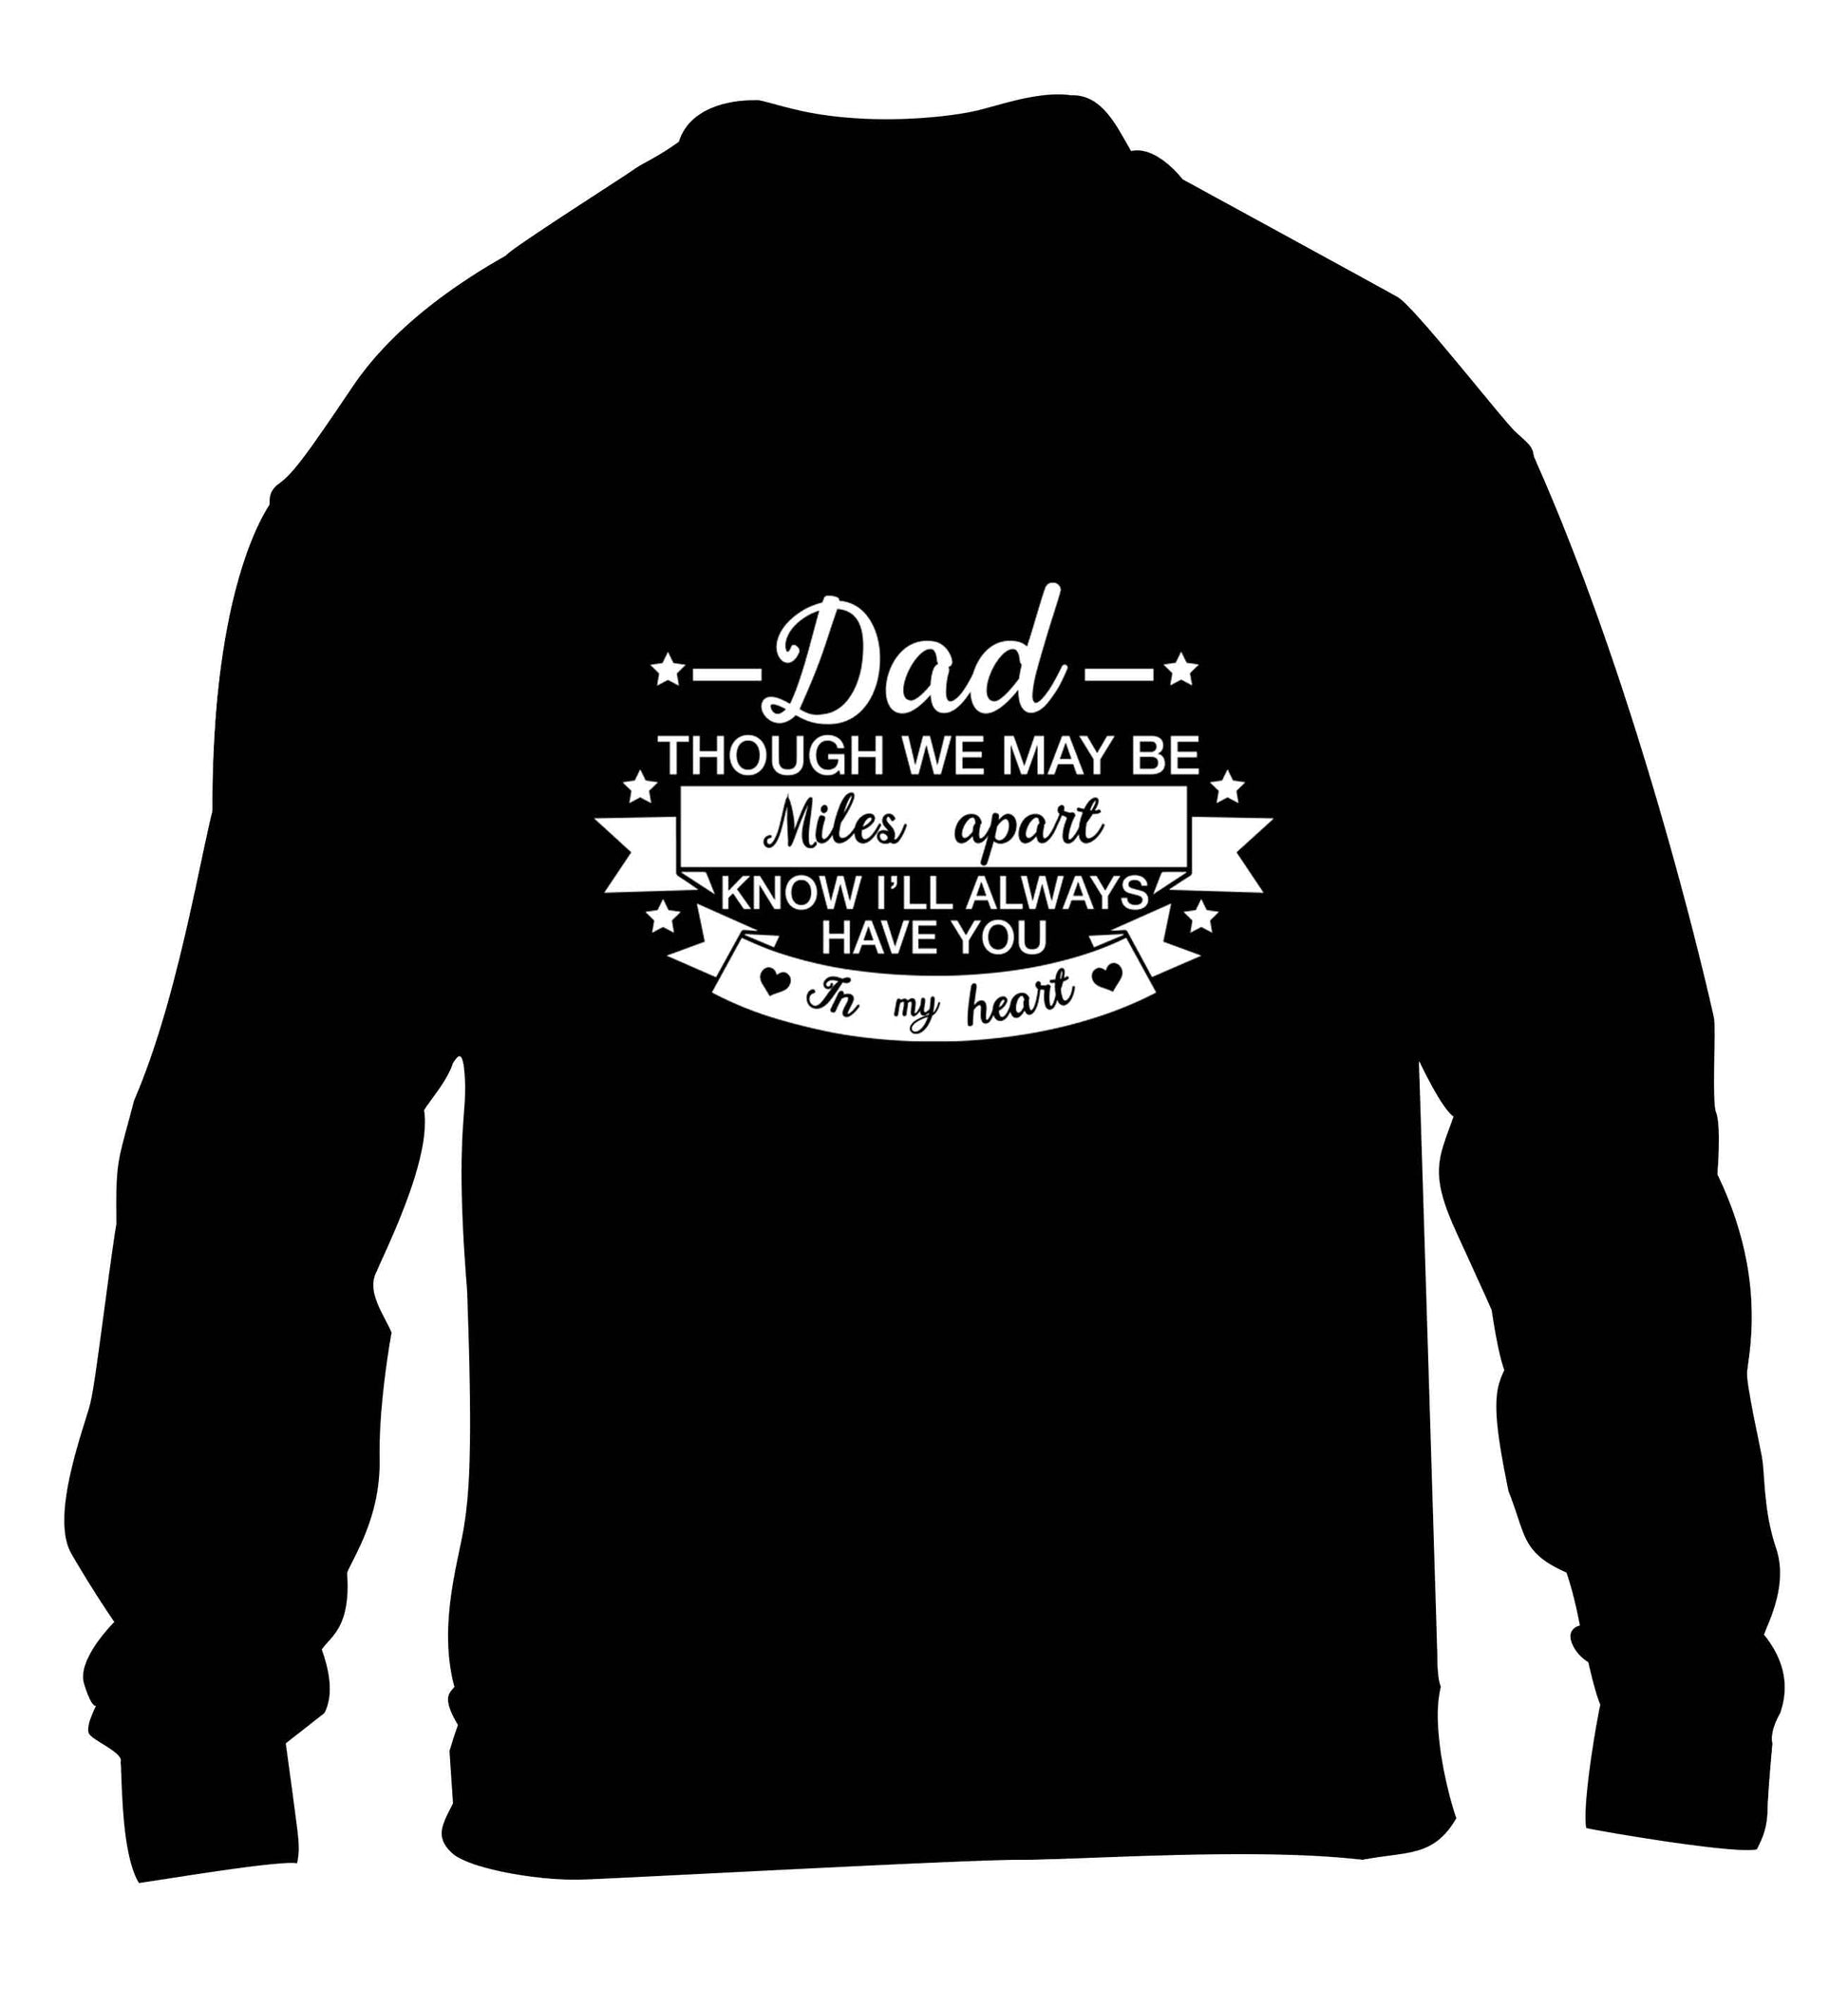 Dad though we are miles apart know I'll always have you in my heart children's black sweater 12-13 Years